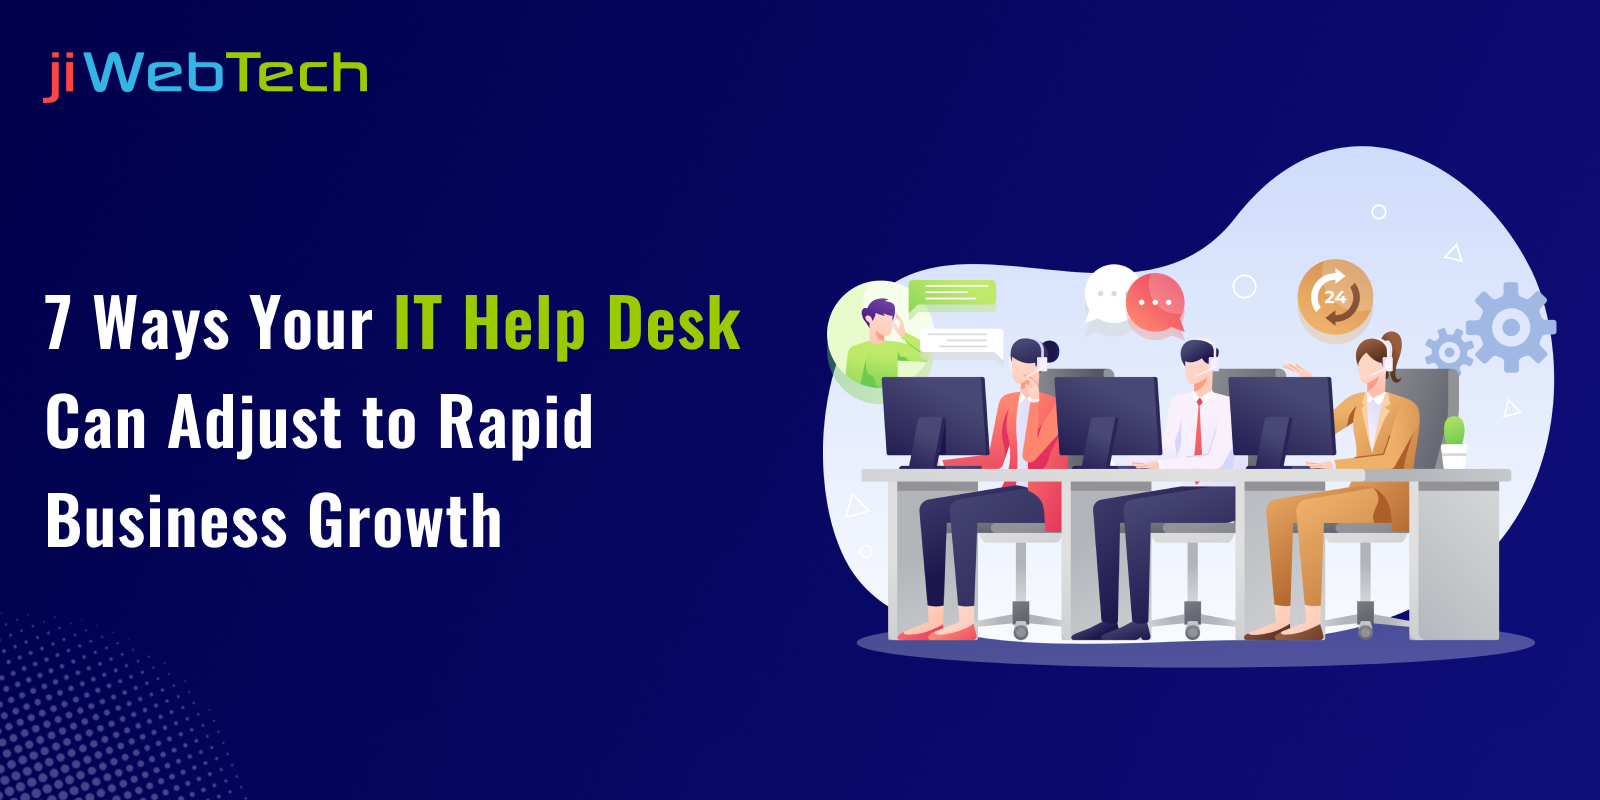 7 Ways Your IT Help Desk Can Adjust to Rapid Business Growth